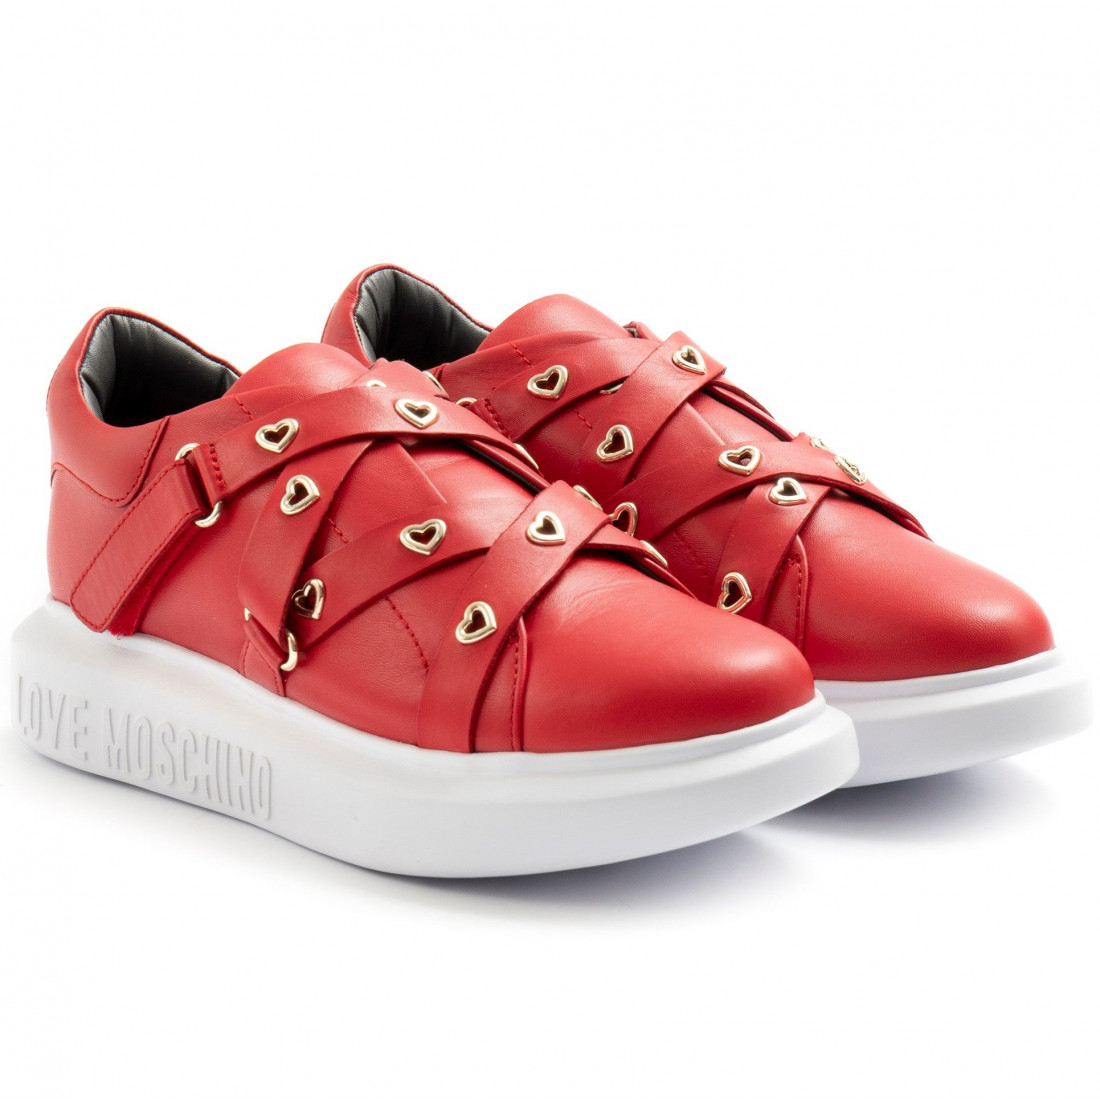 Love Moschino women's red sneaker with 